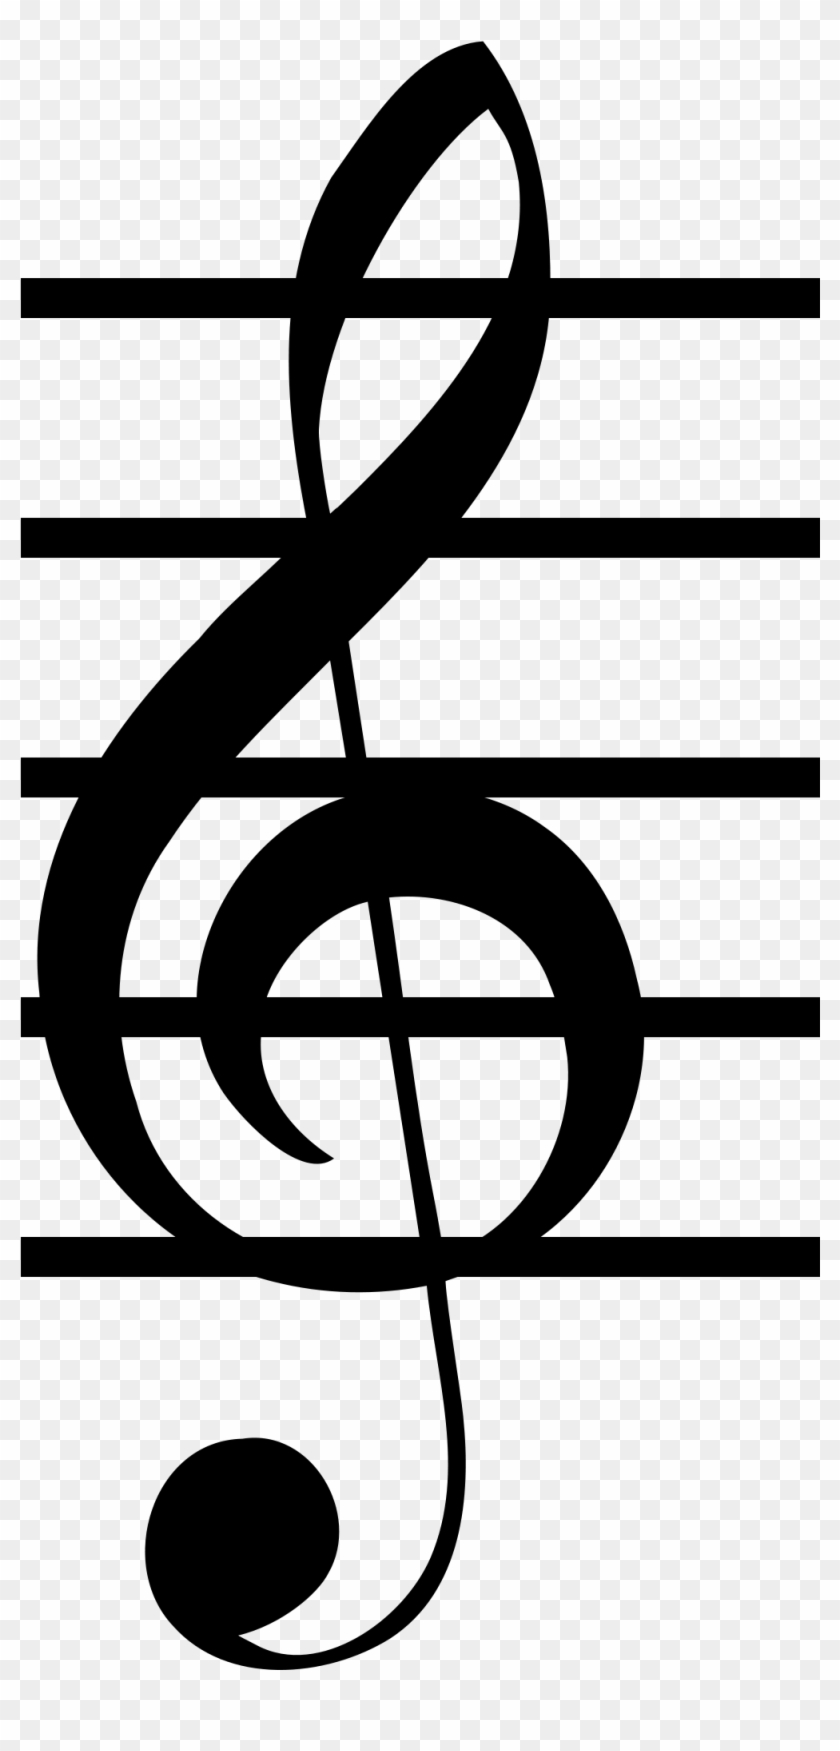 Open - Transparent Background Music Notes Black And White Clipart #4522978